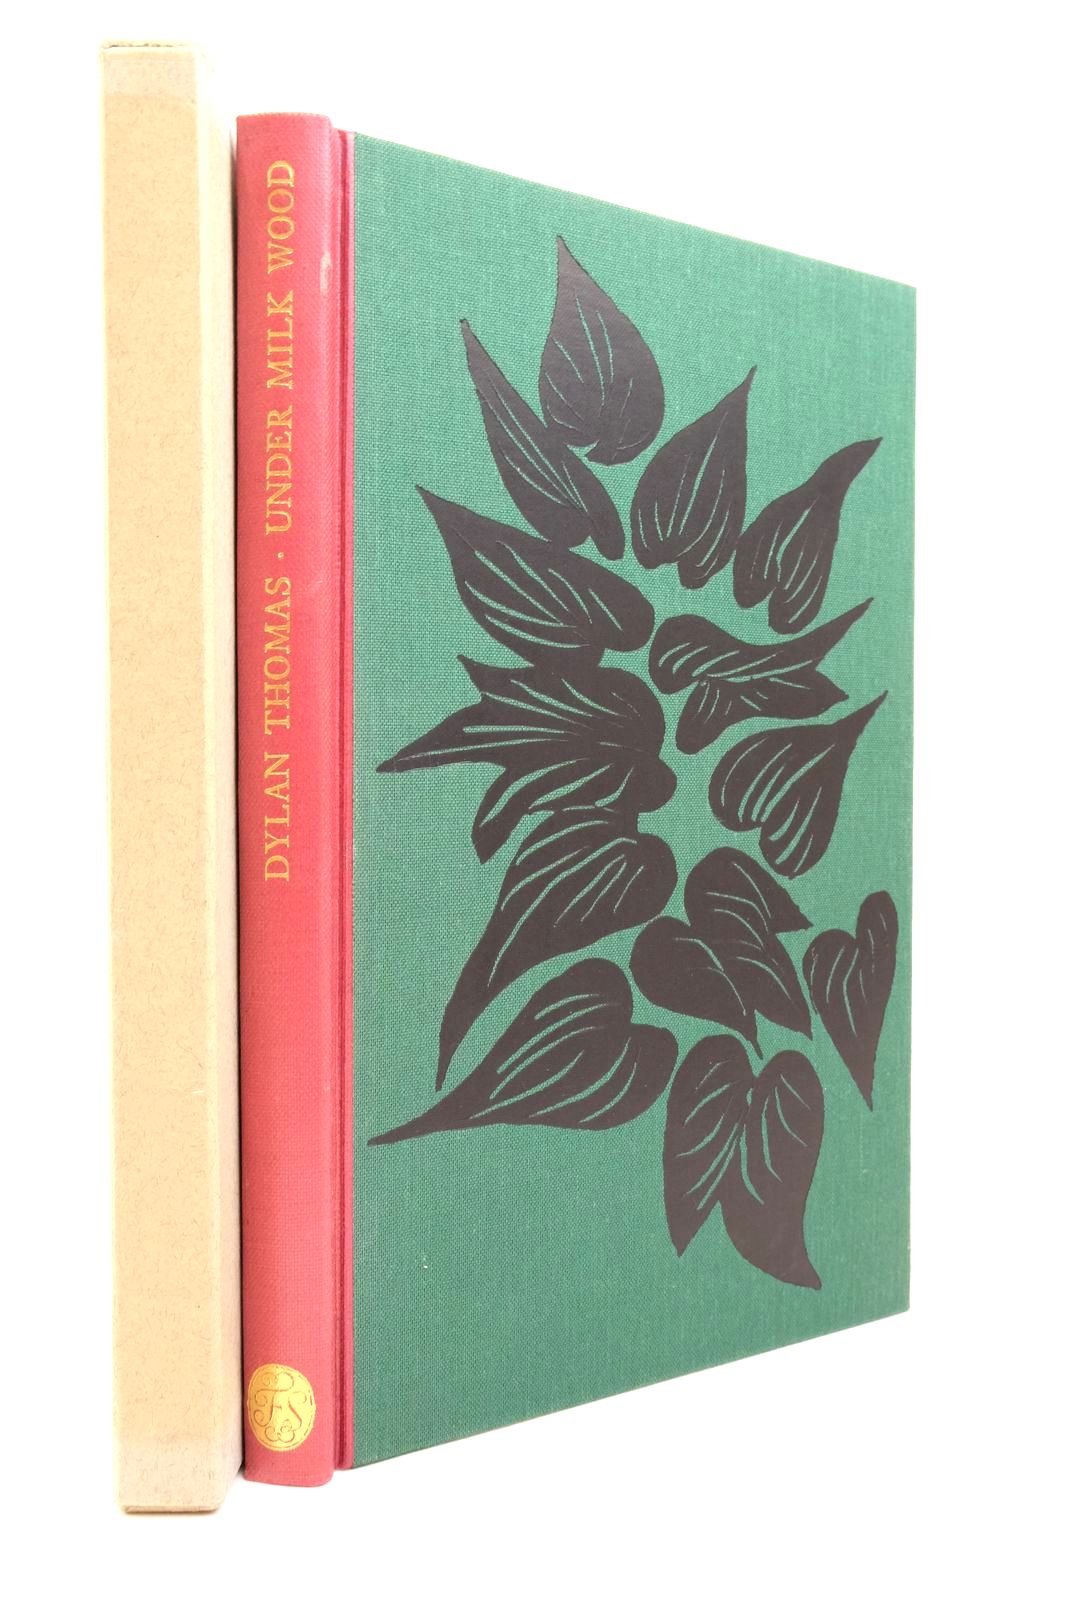 Photo of UNDER MILK WOOD written by Thomas, Dylan illustrated by Richards, Ceri published by Folio Society (STOCK CODE: 2138357)  for sale by Stella & Rose's Books